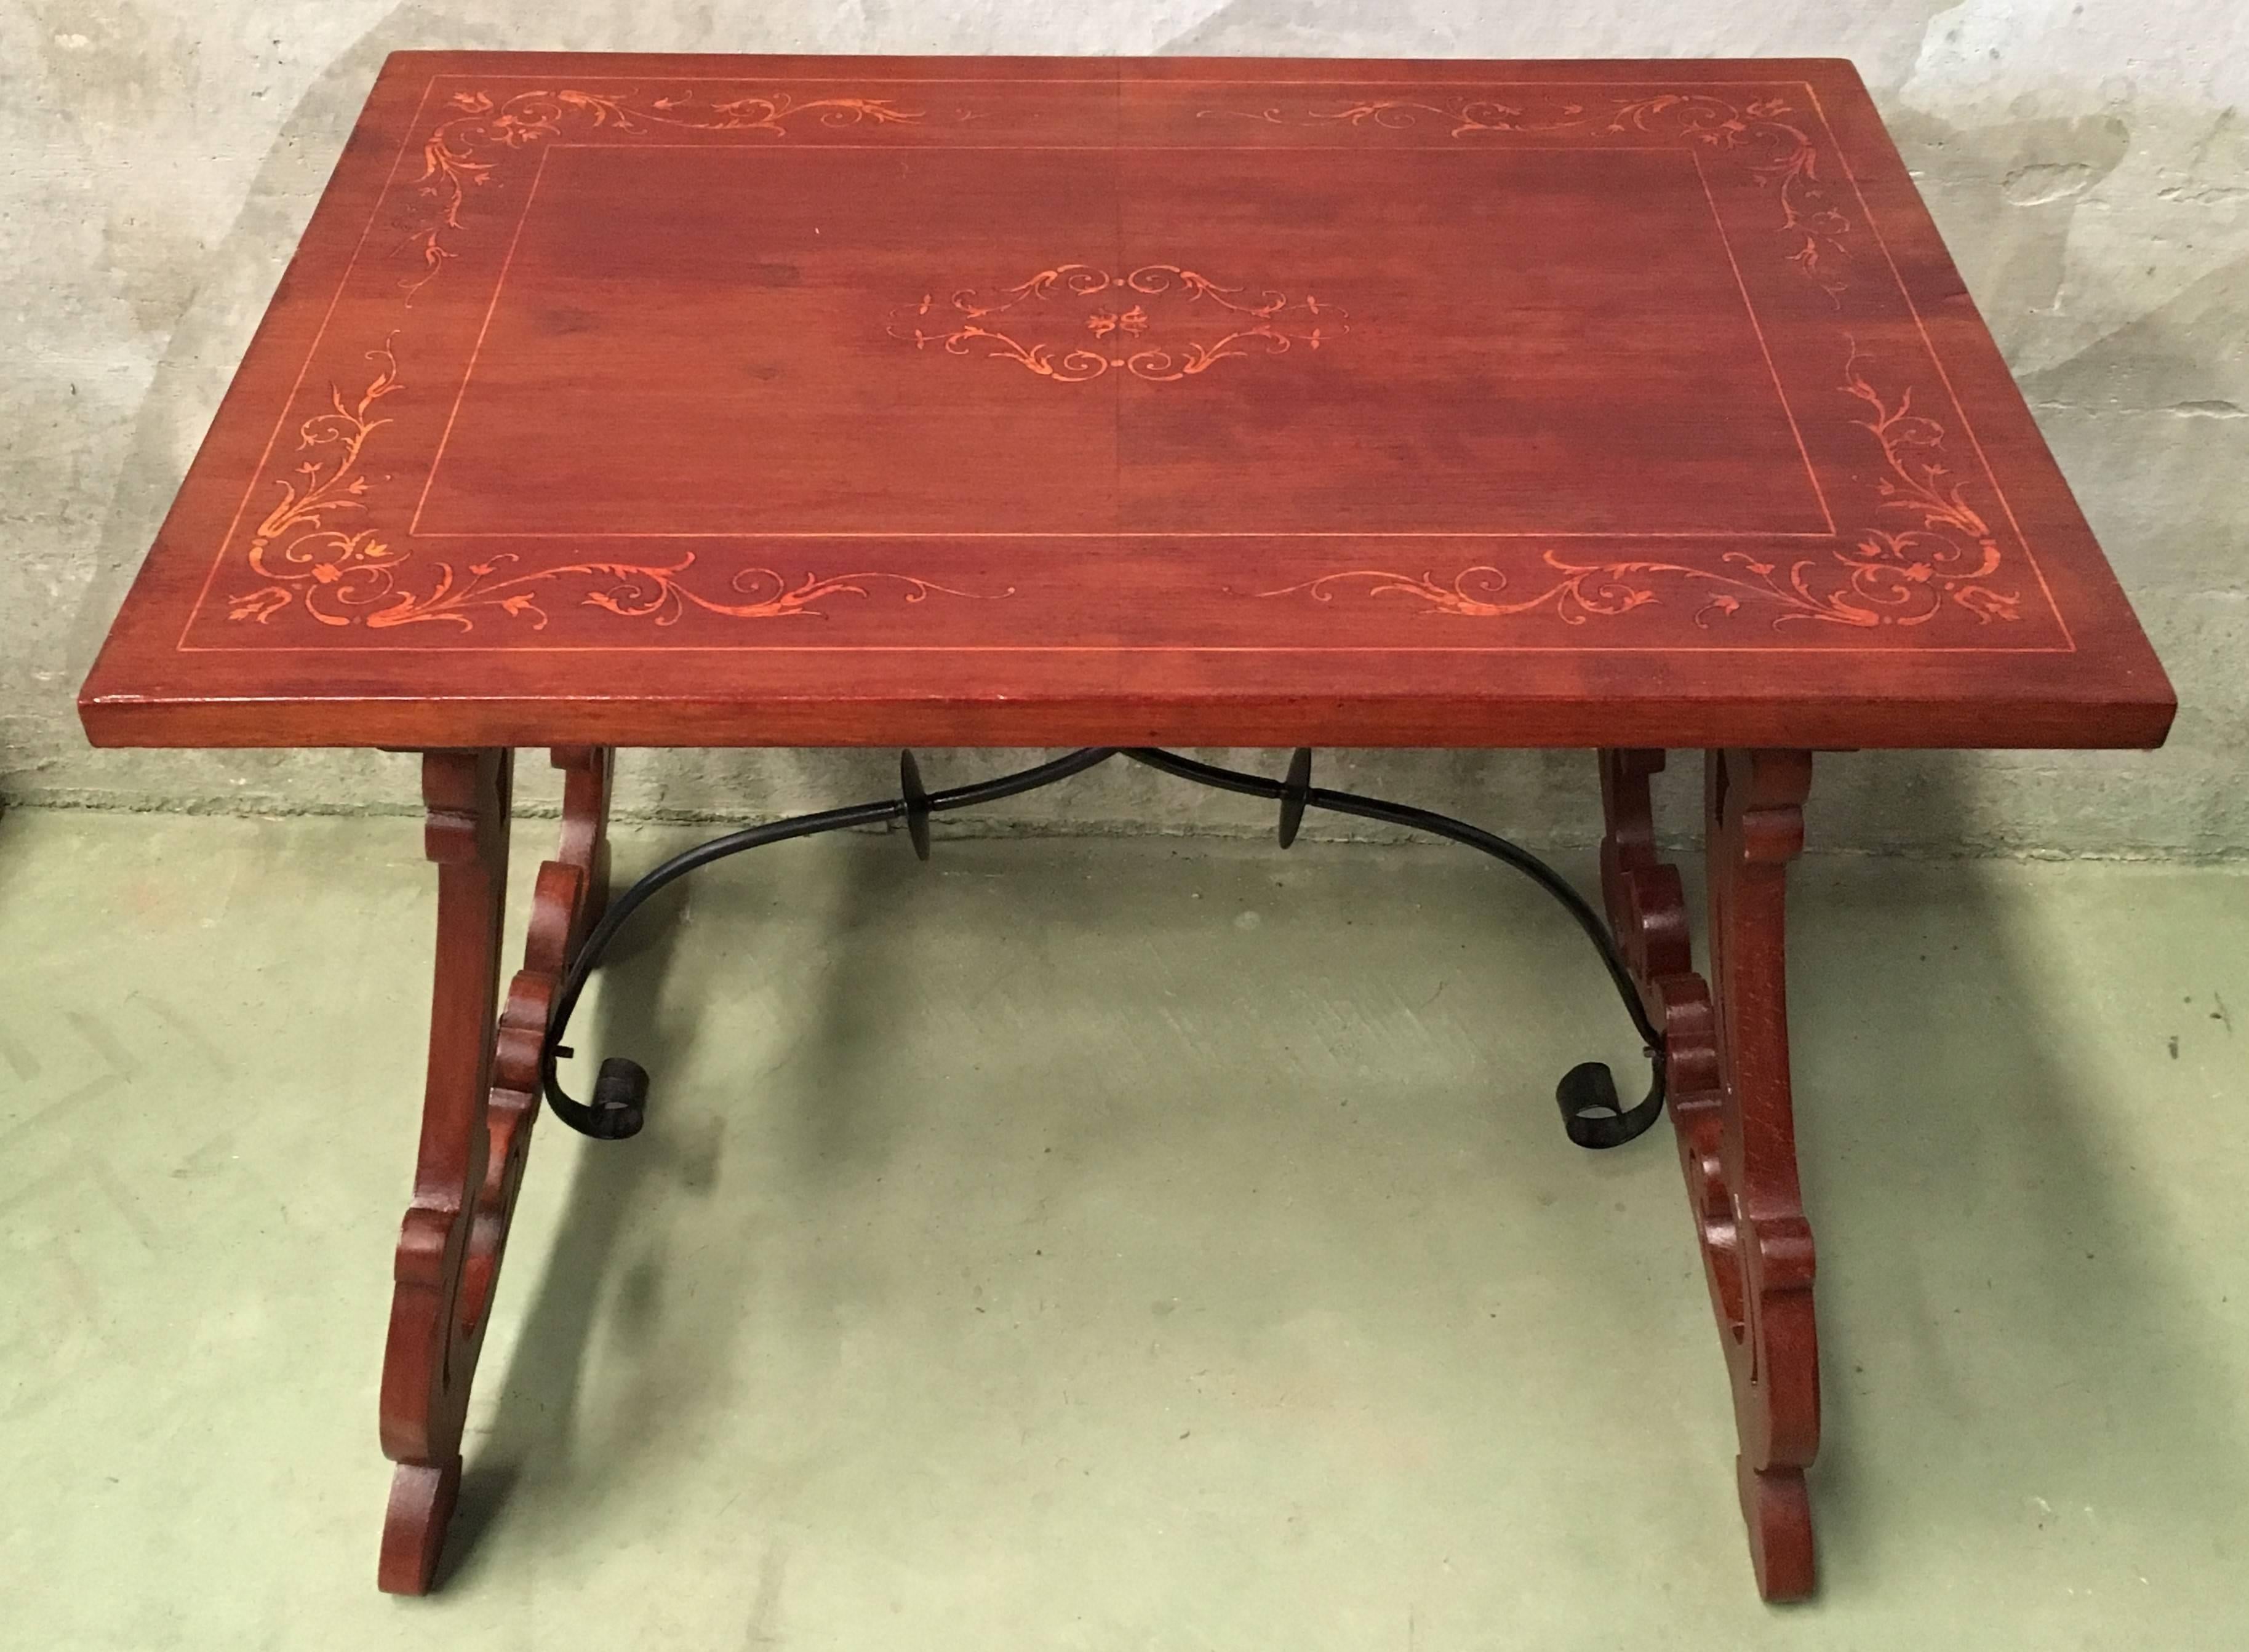 Spanish Colonial 19th Century Baroque Spanish Side Table with Marquetry Top & Lyre Legs For Sale